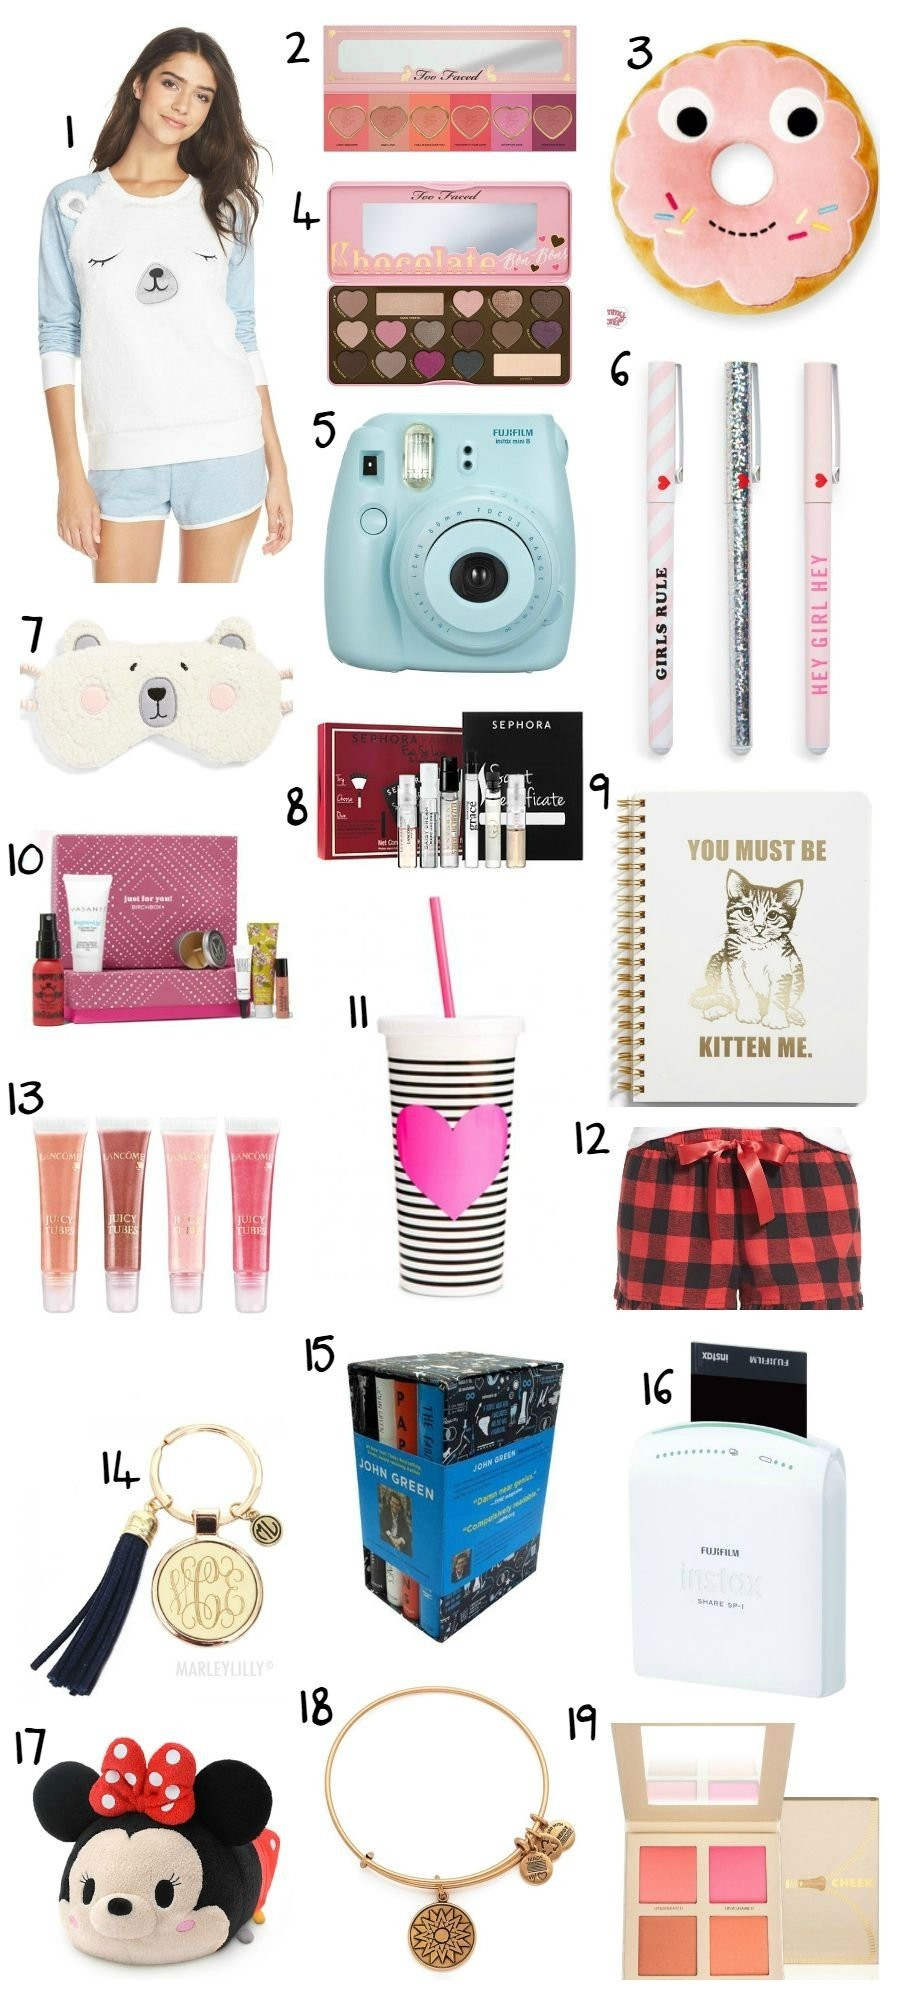 The top 24 Ideas About Christmas Gift Ideas 2020 for Teen Girls - Home